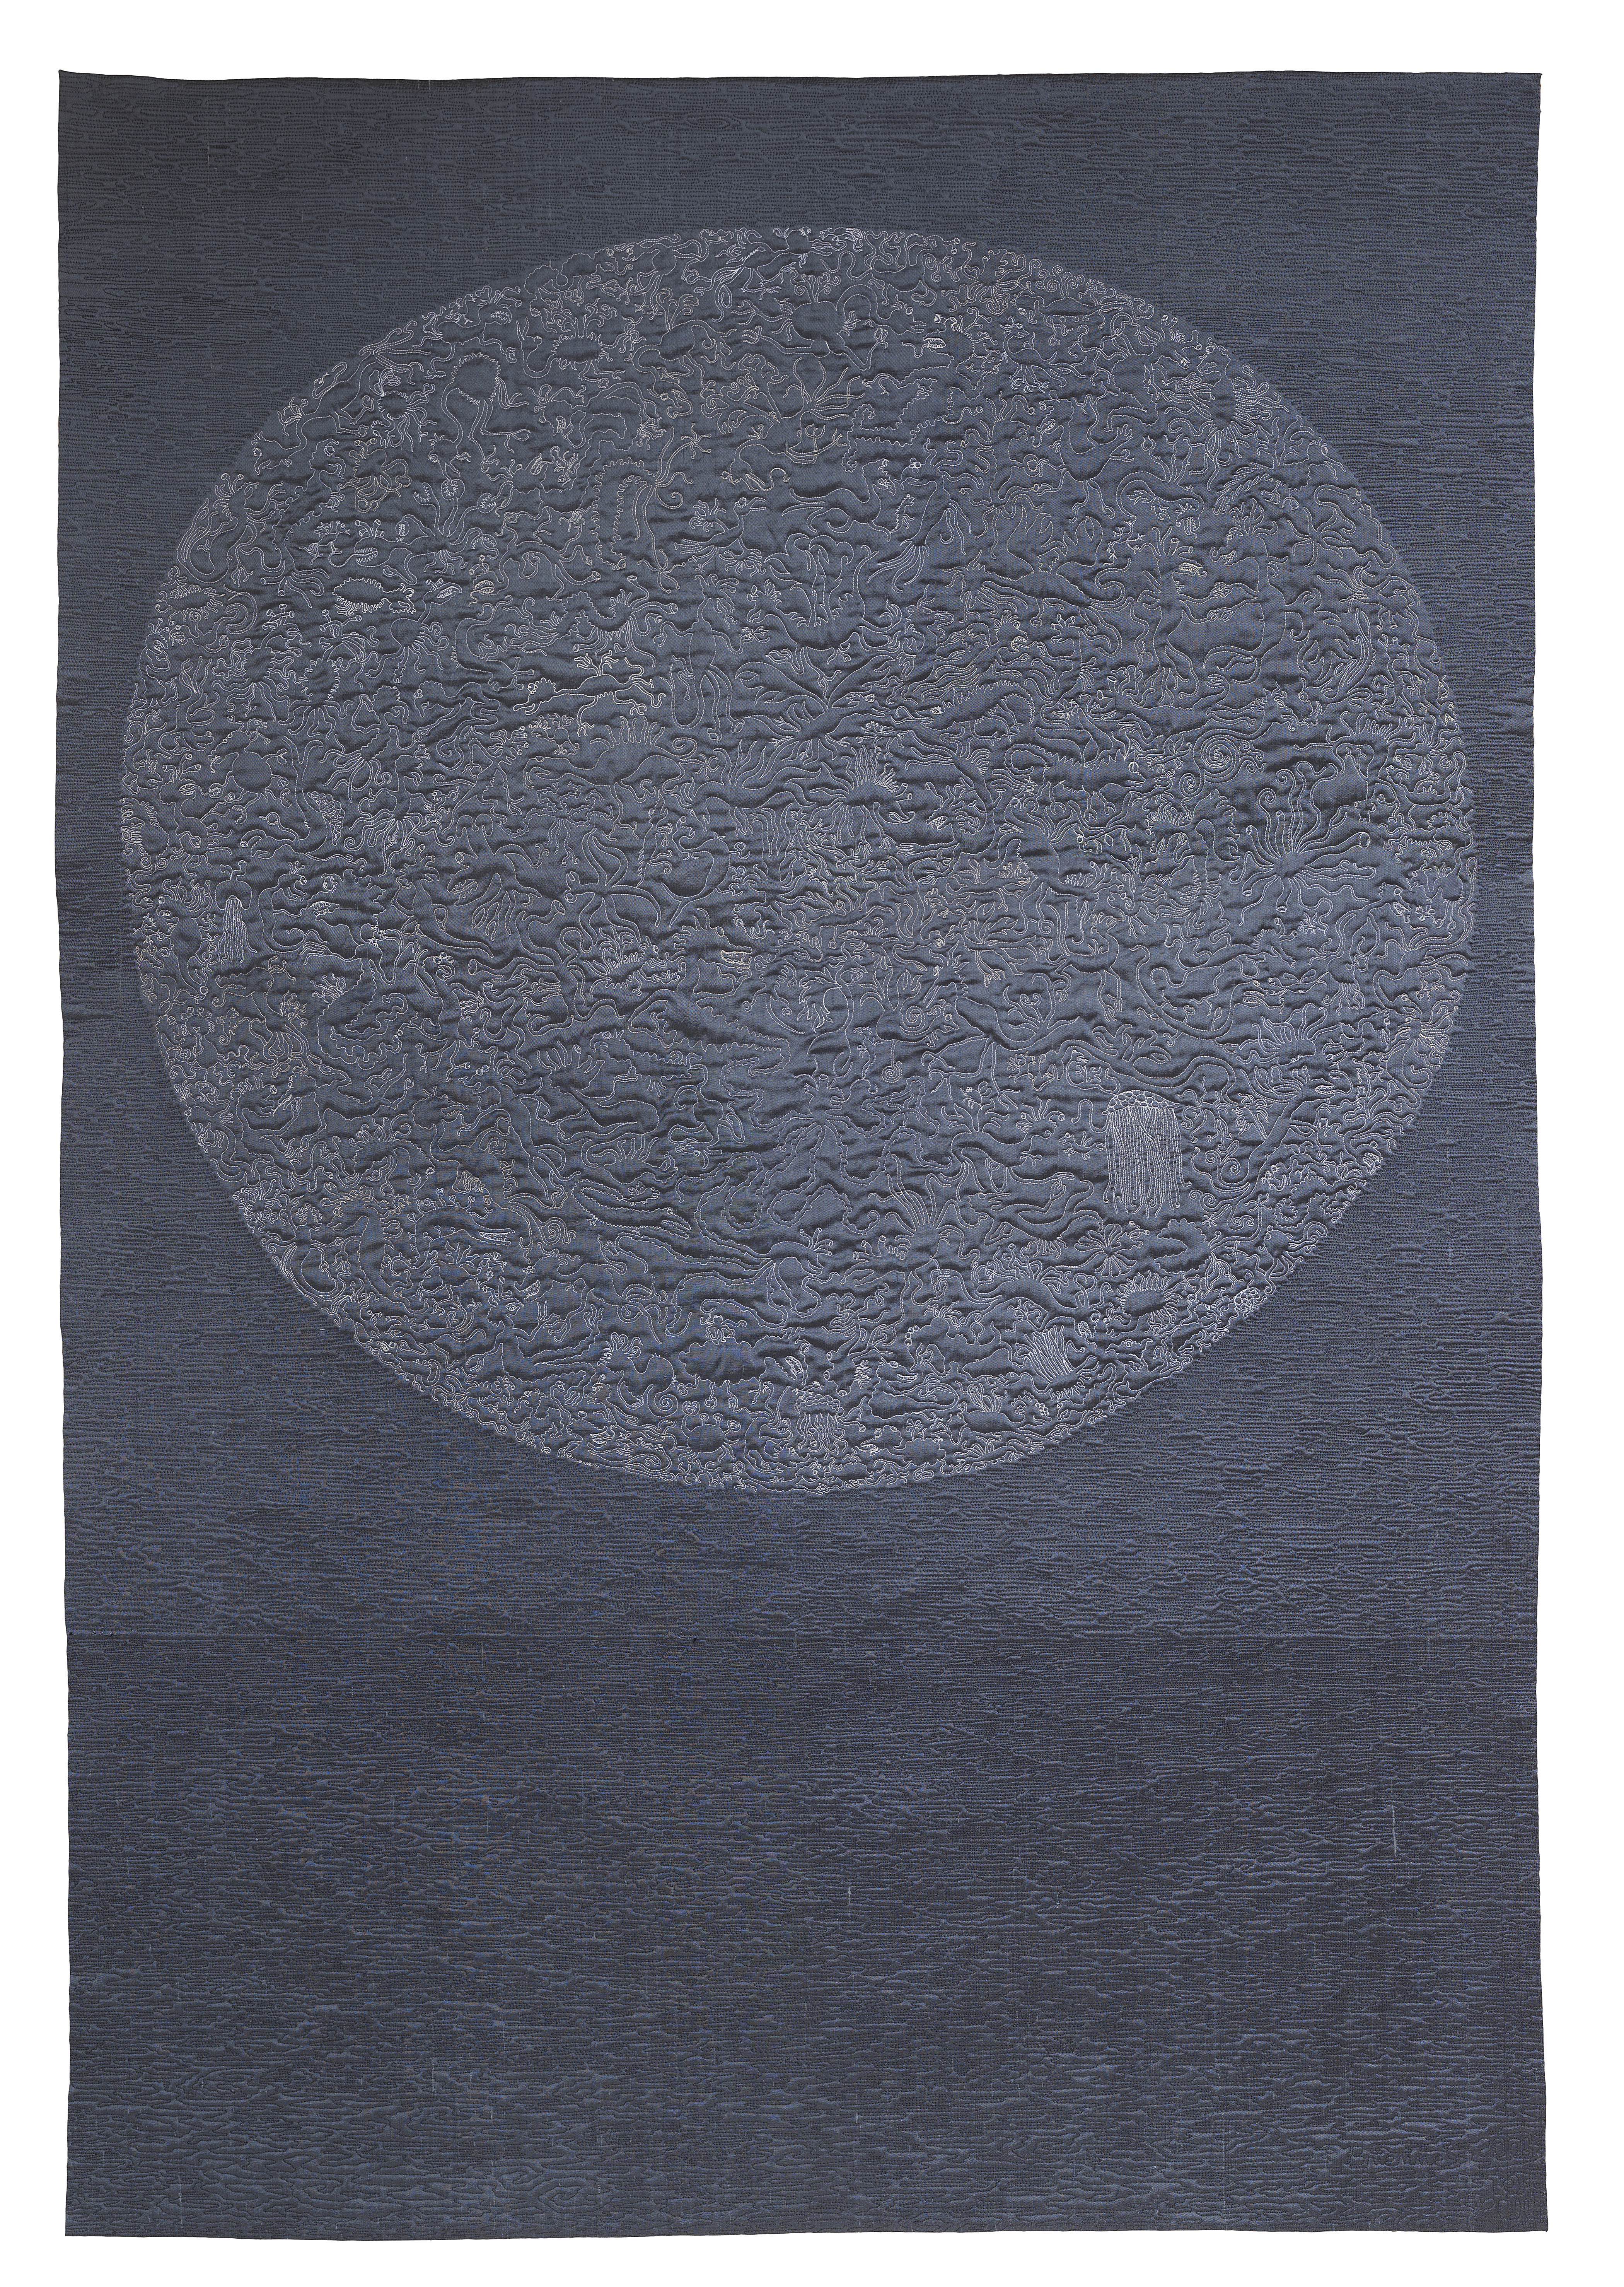 moonset, 35x50 machine quilted wall hanging by brienne brown